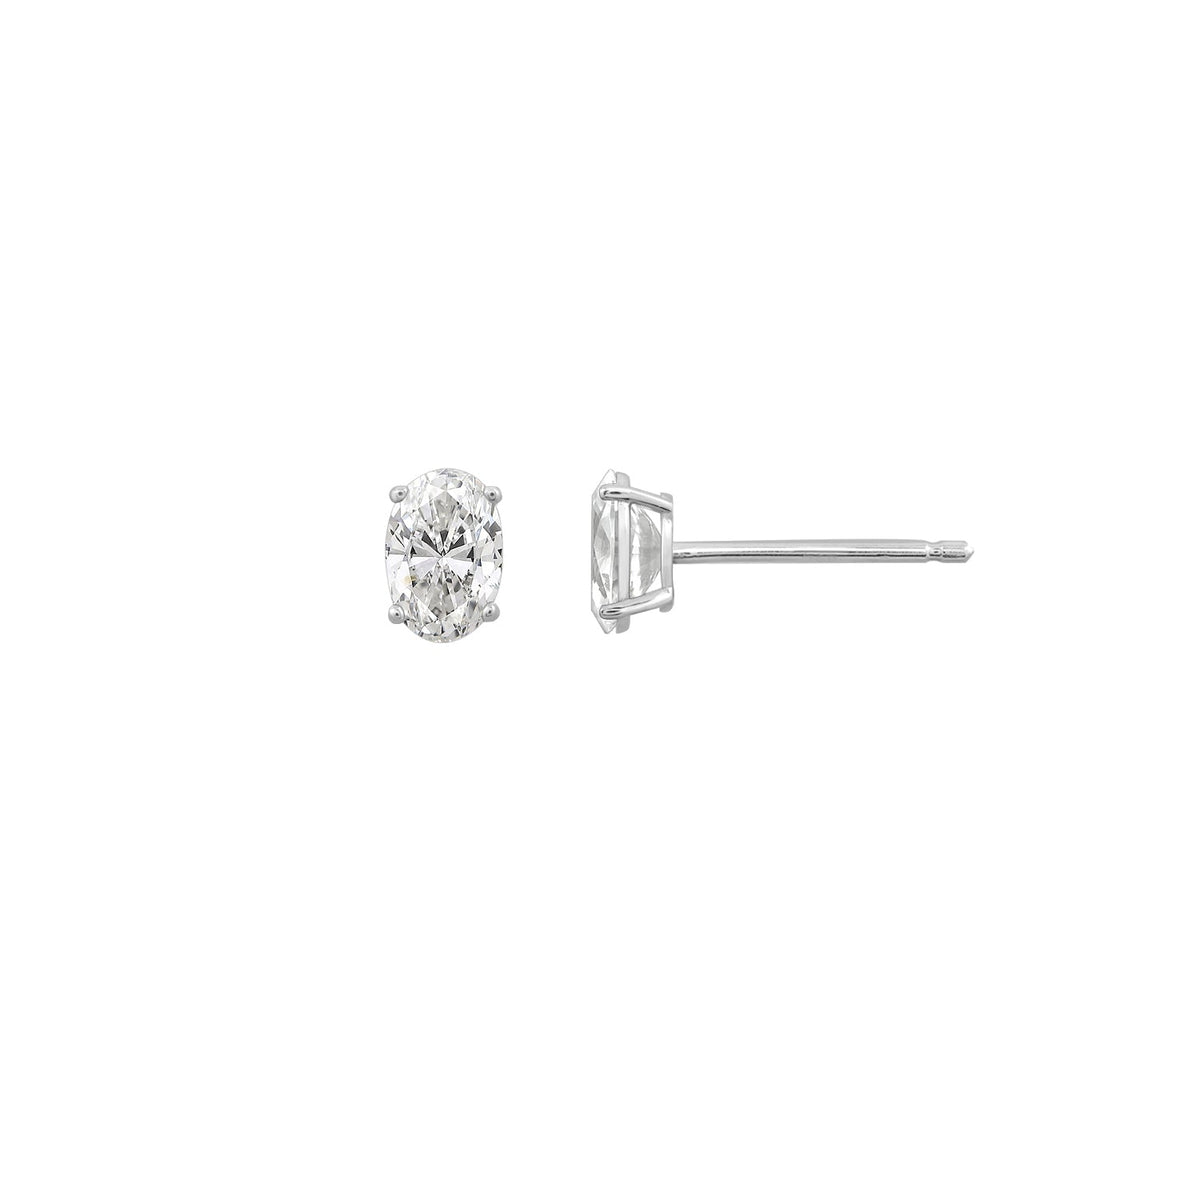 14K Solid Gold Solitaire Earrings